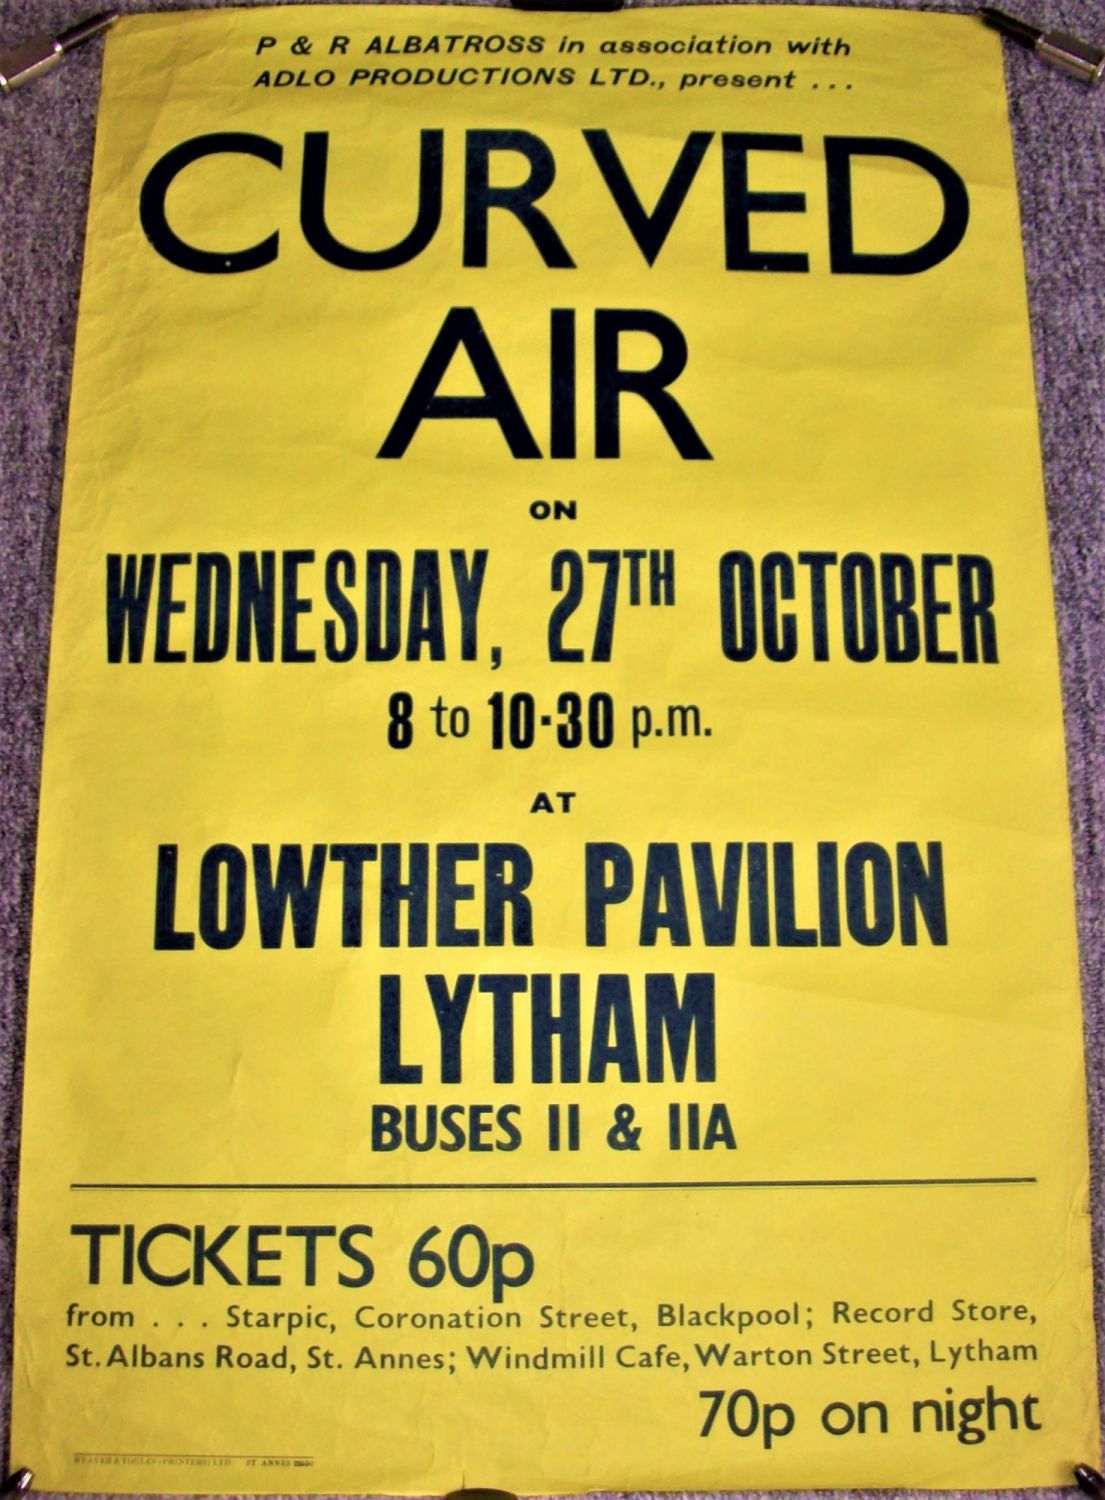 CURVED AIR CONCERT POSTER WEDNESDAY 27th OCTOBER 1971 LOWTHER PAVILION LYTH